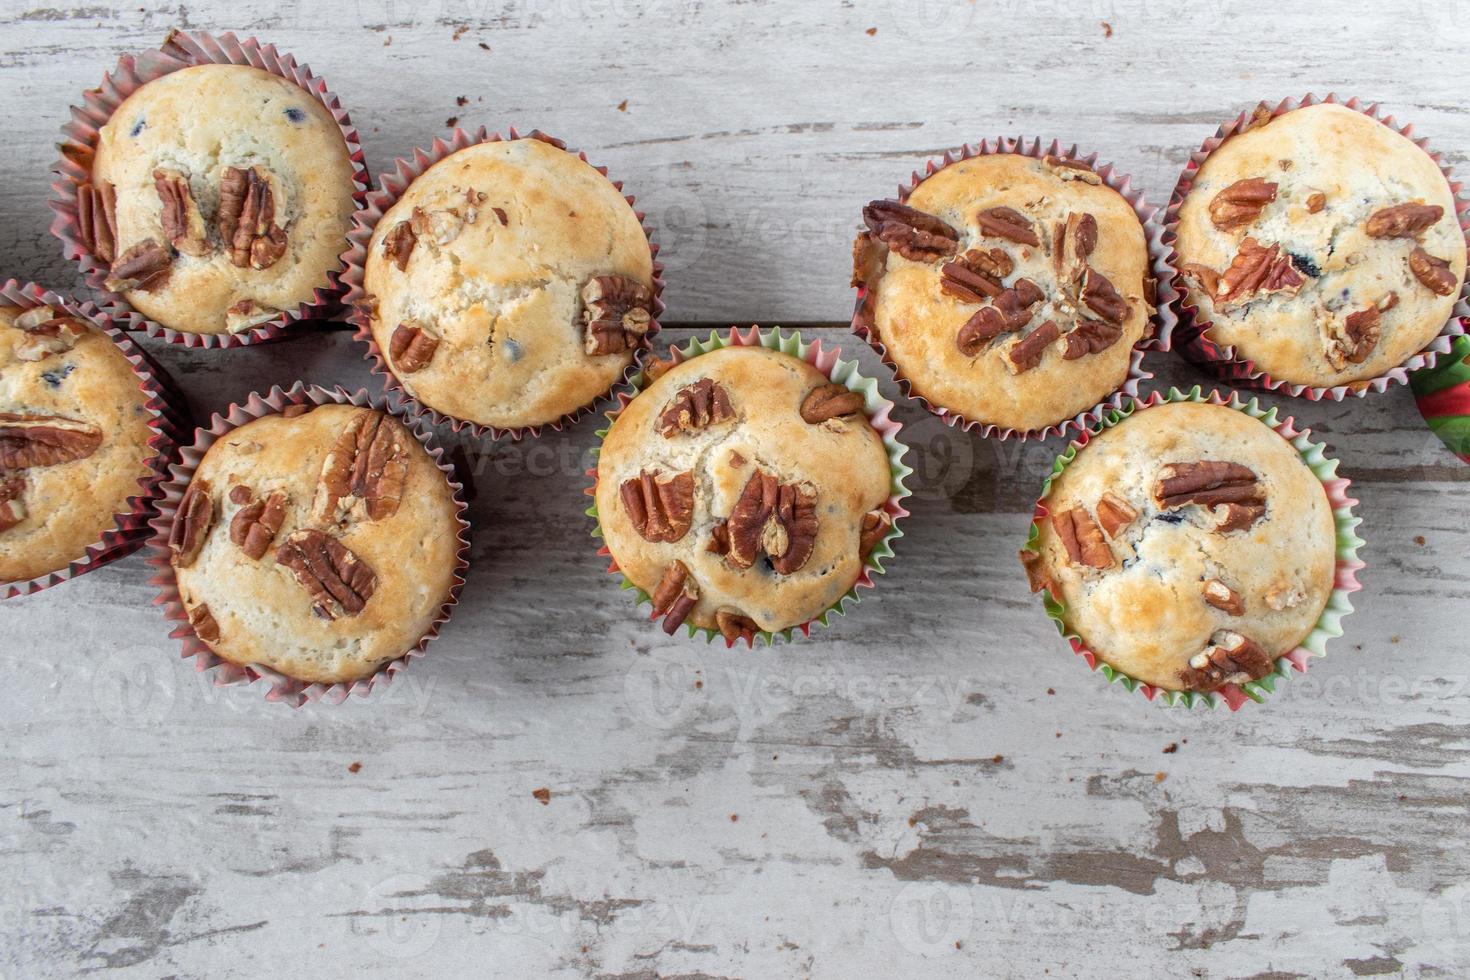 group of baked blueberry muffins topped with pecans with copy space photo